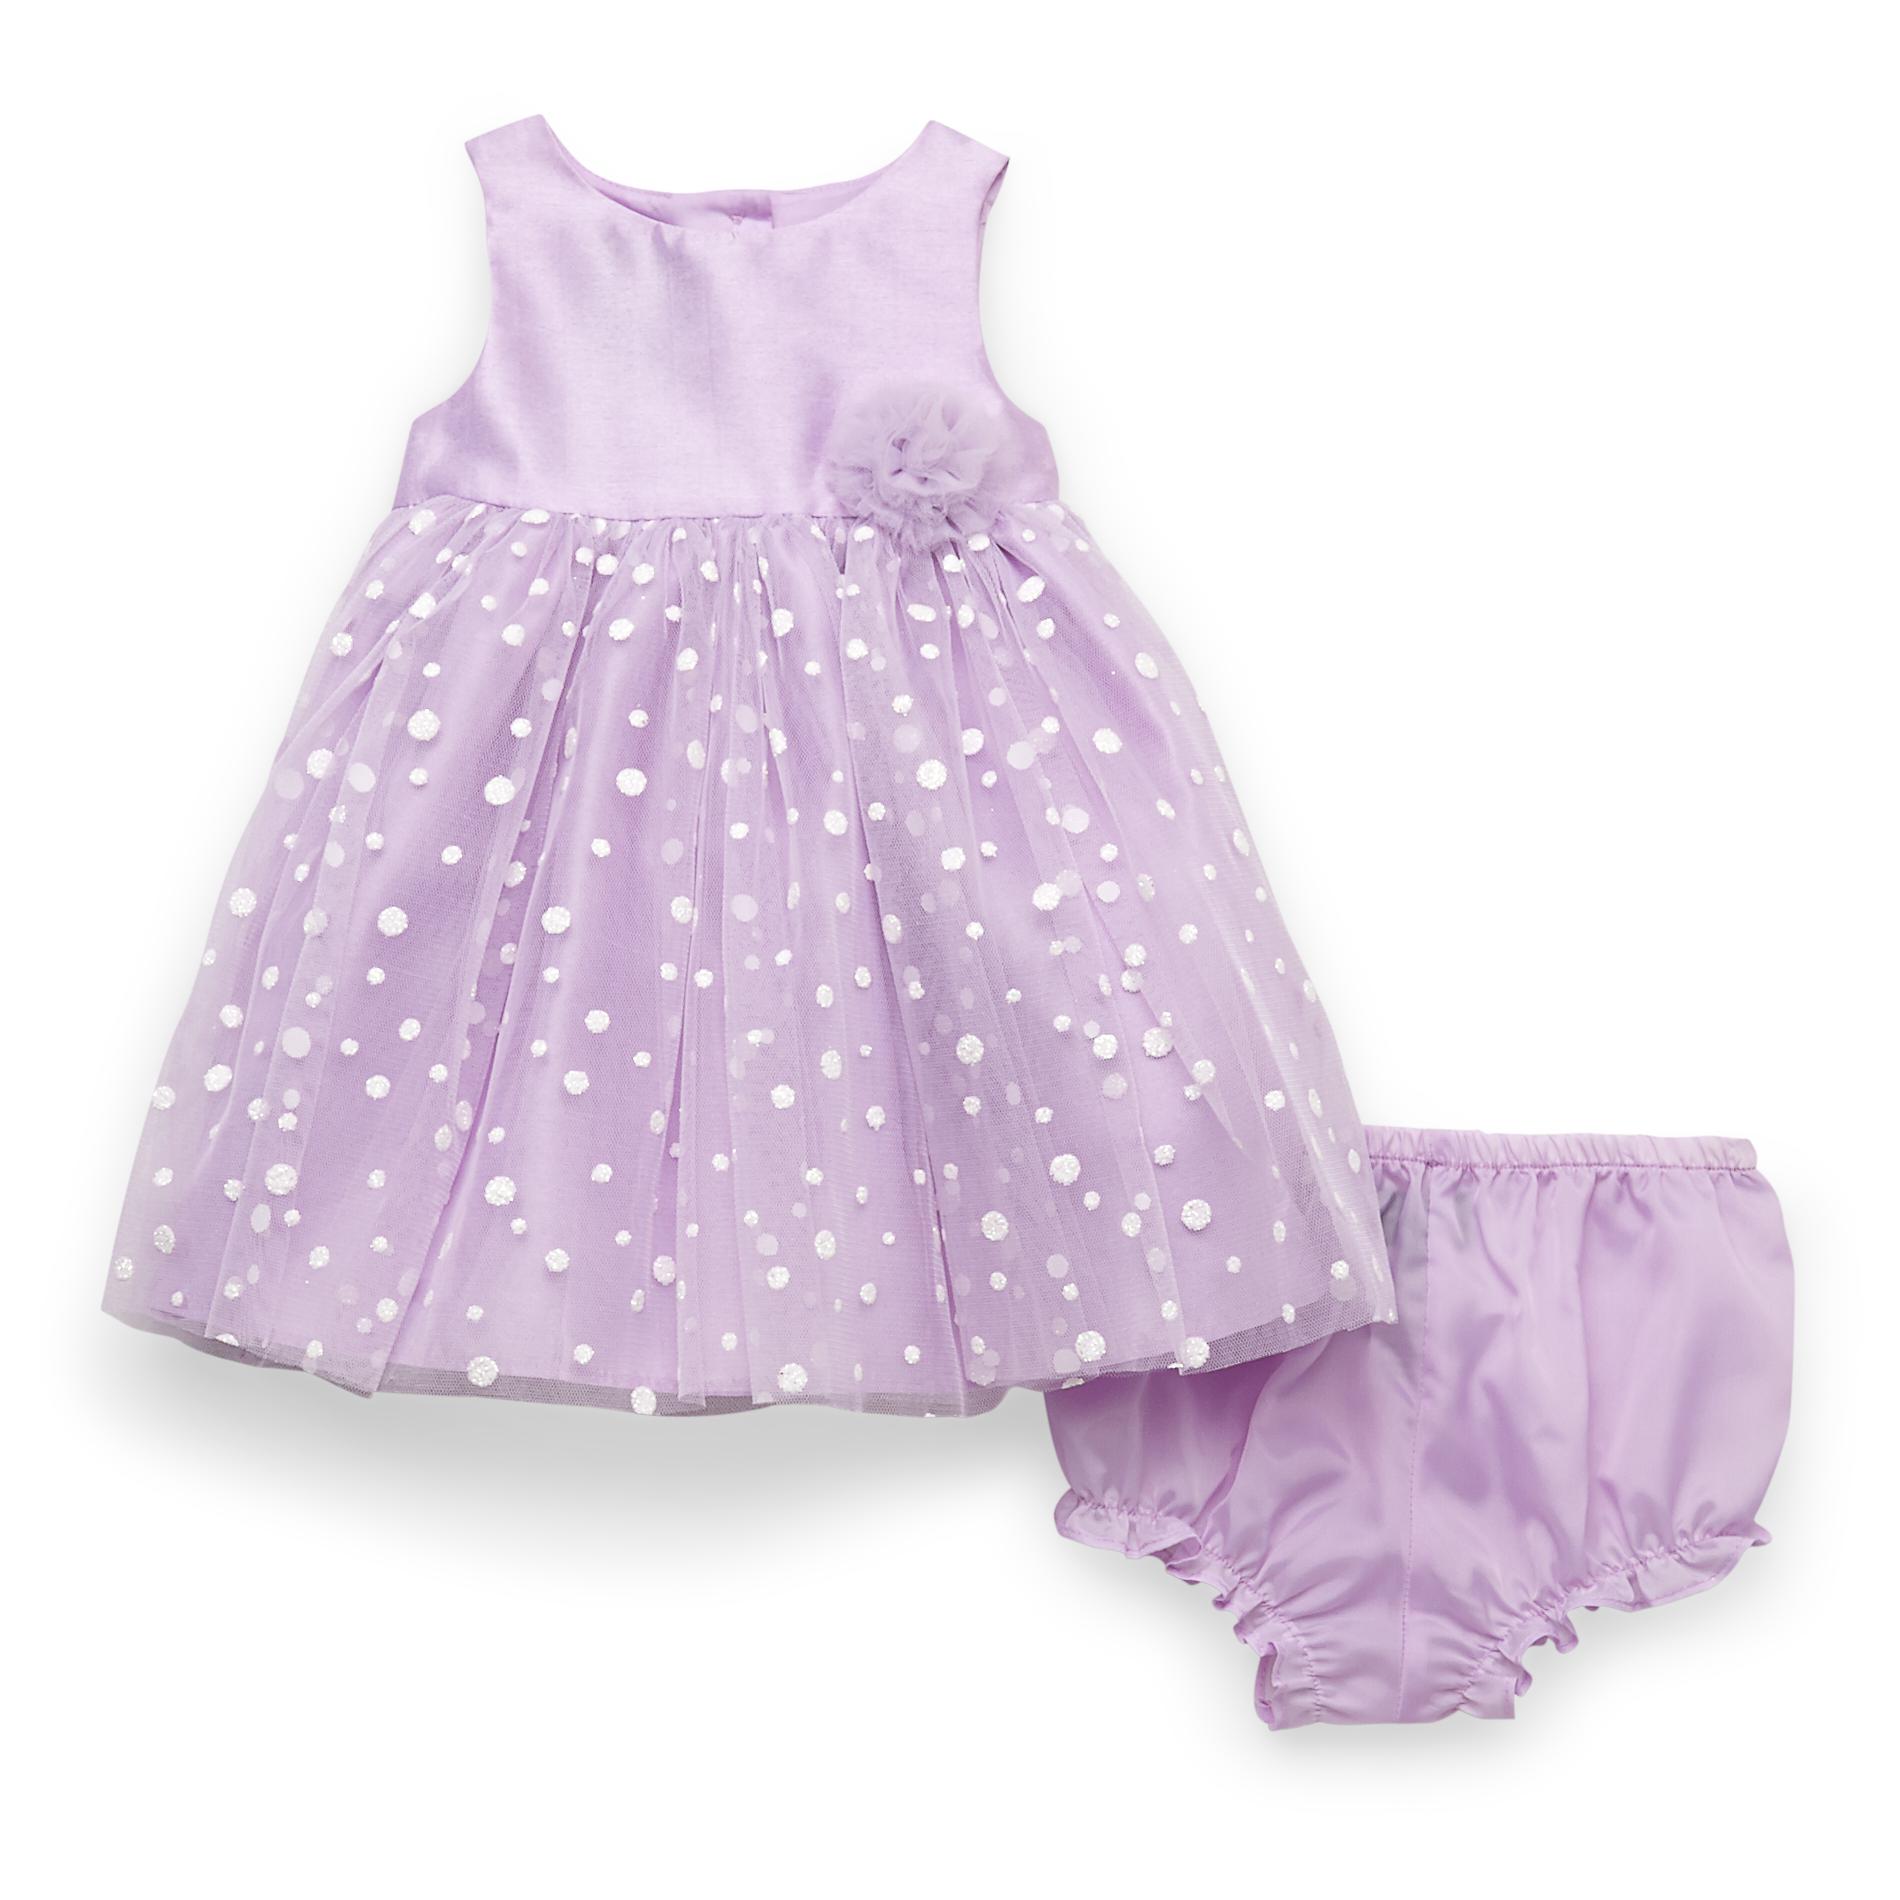 Holiday Editions Toddler Girl's Glitter Party Dress